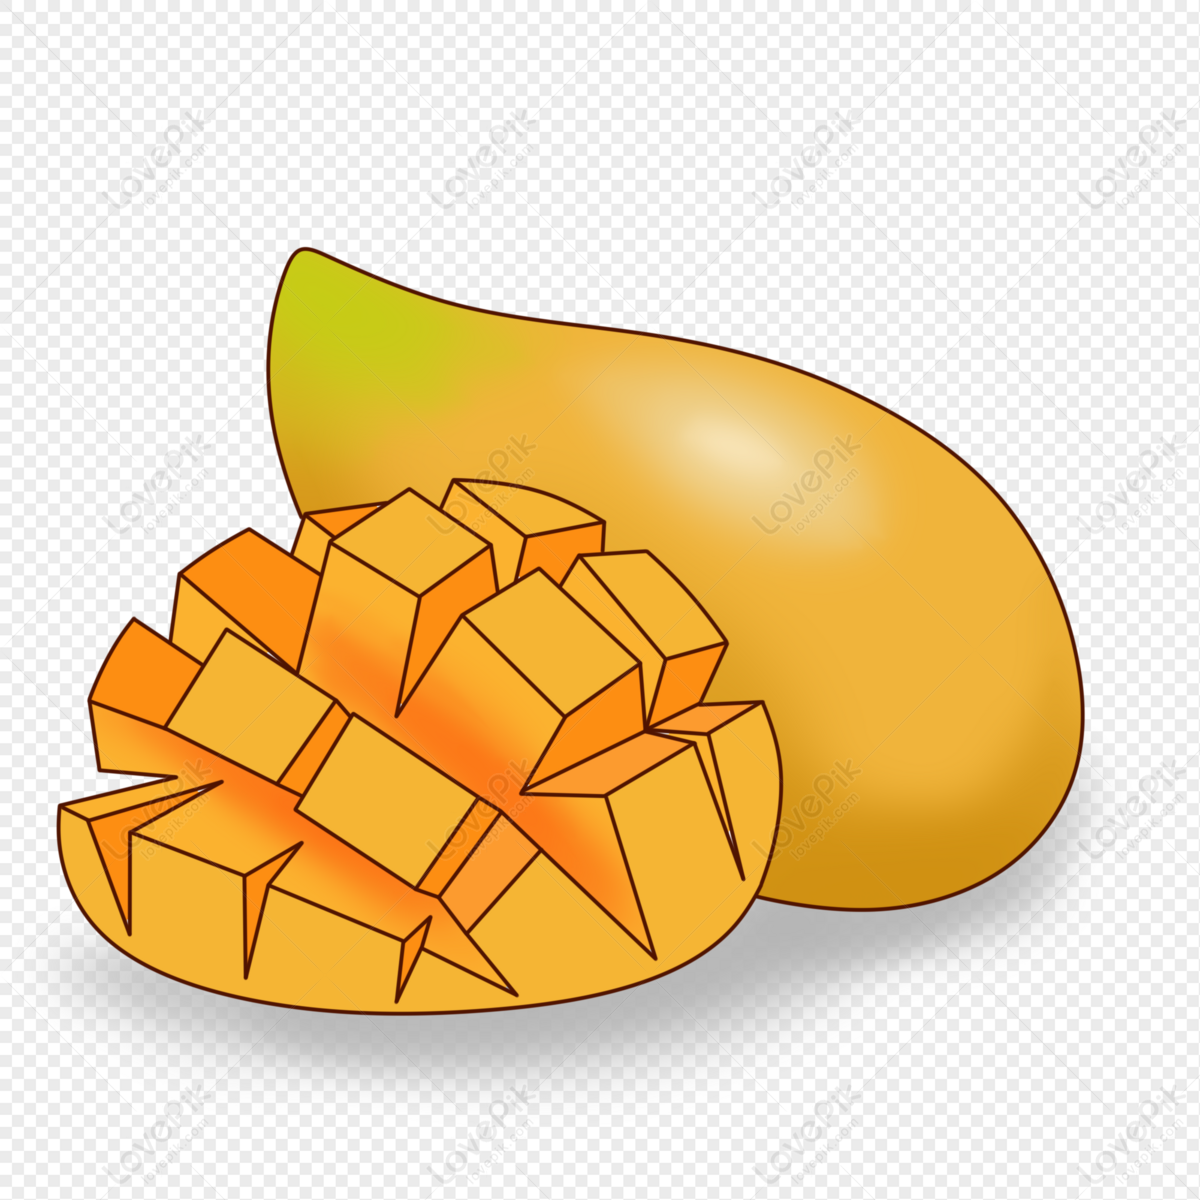 Cartoon Hand Drawn Mango PNG Transparent Image And Clipart Image For Free  Download - Lovepik | 401104567